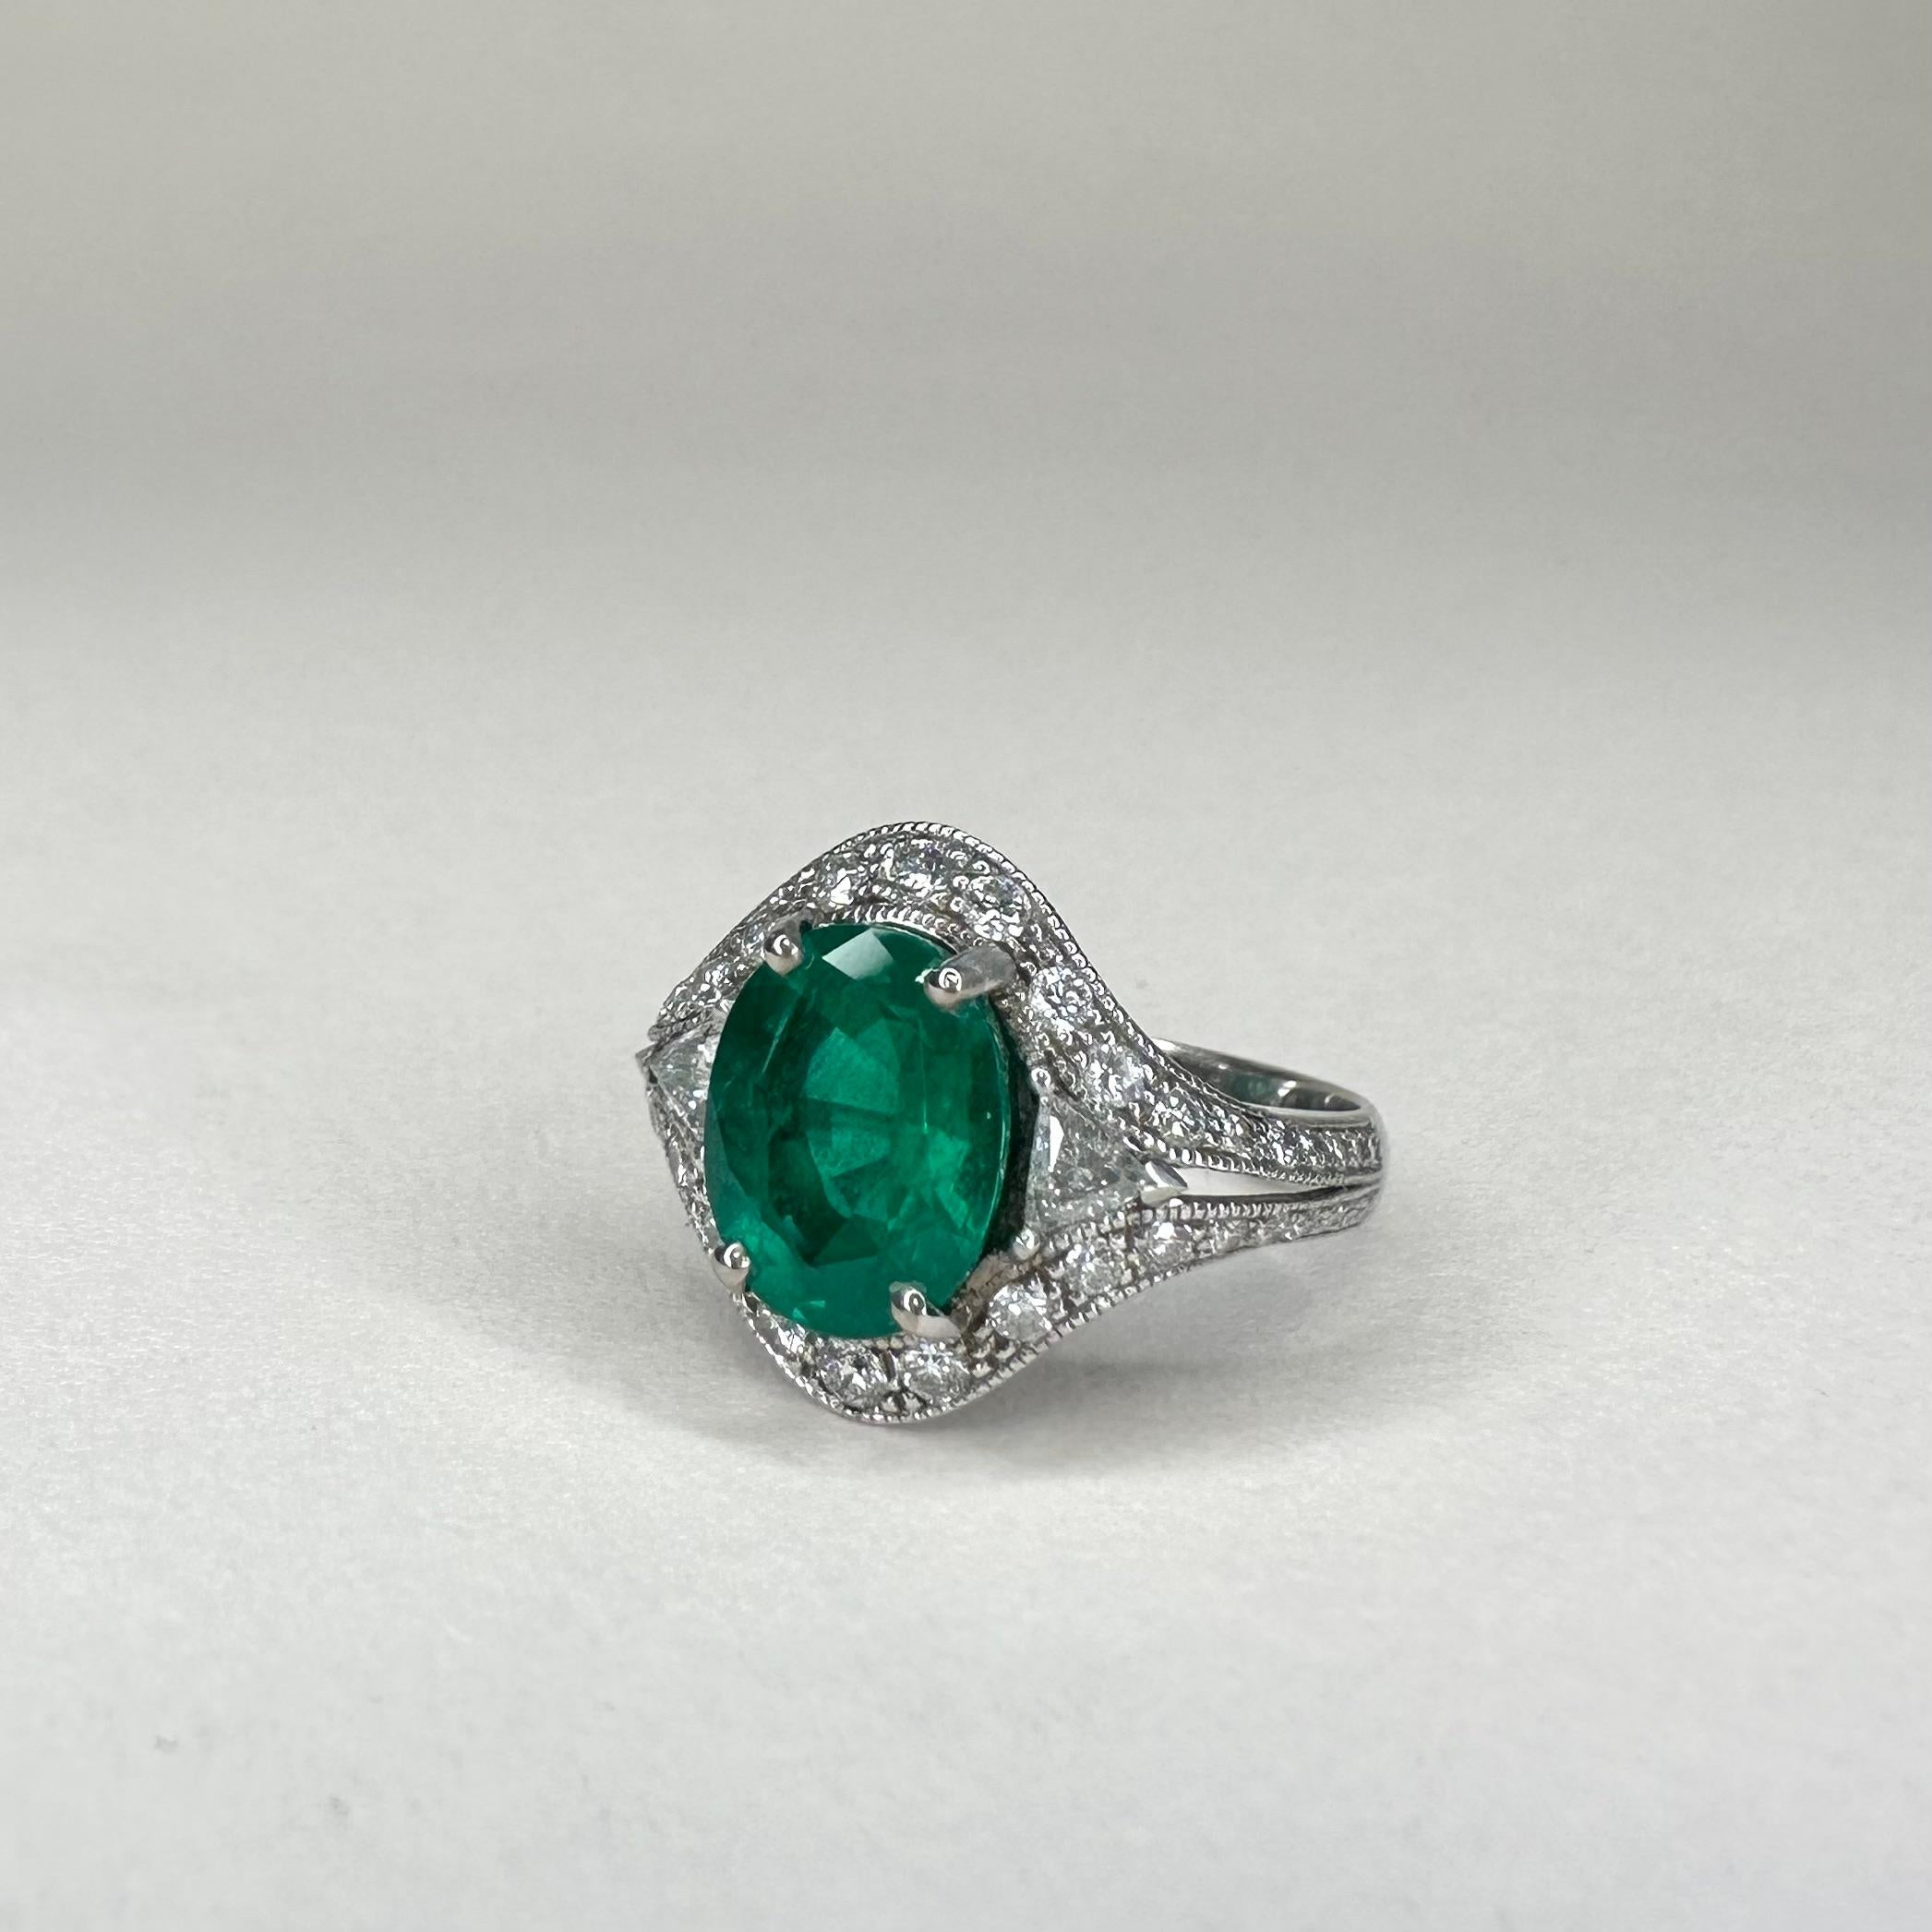 For Sale:  18k White Gold 2.53 Ct Oval Vivid Green Emerald Ring 0.74 Cts of Diamonds 4